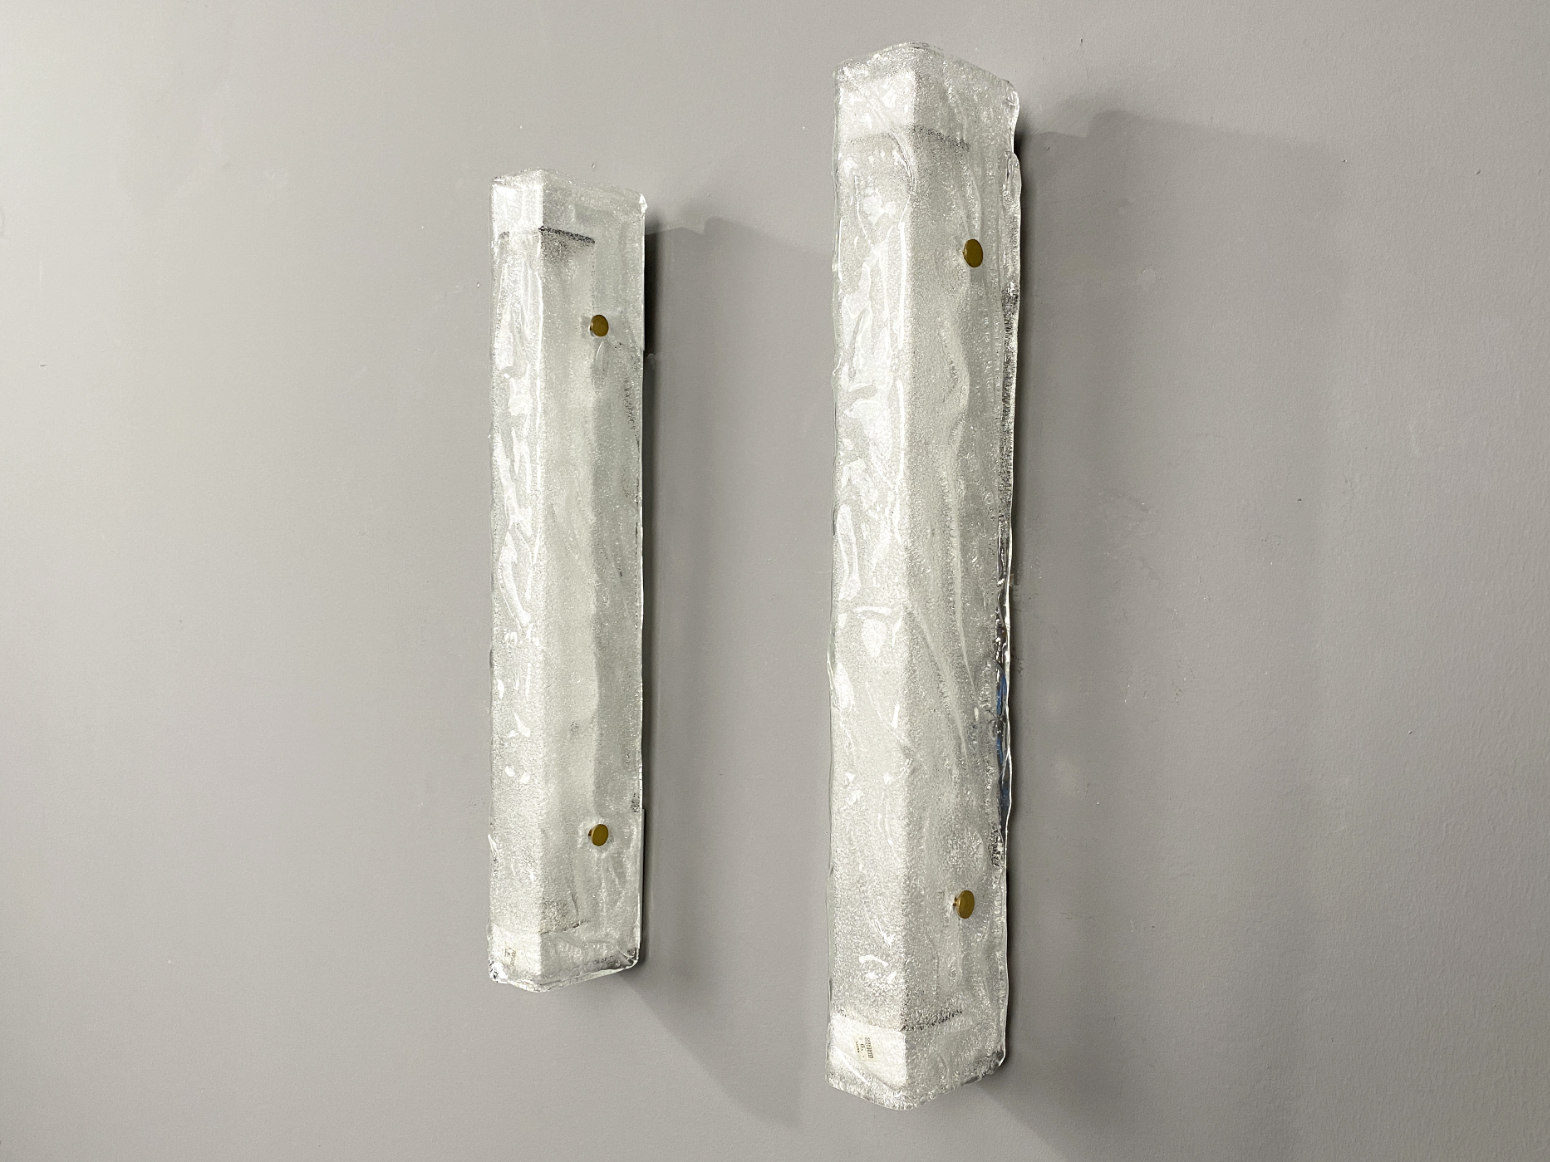 Pair of large Murano Ice Glass Sconces / Wall Lamps, Kaiser Leuchten, Germany, 1970s